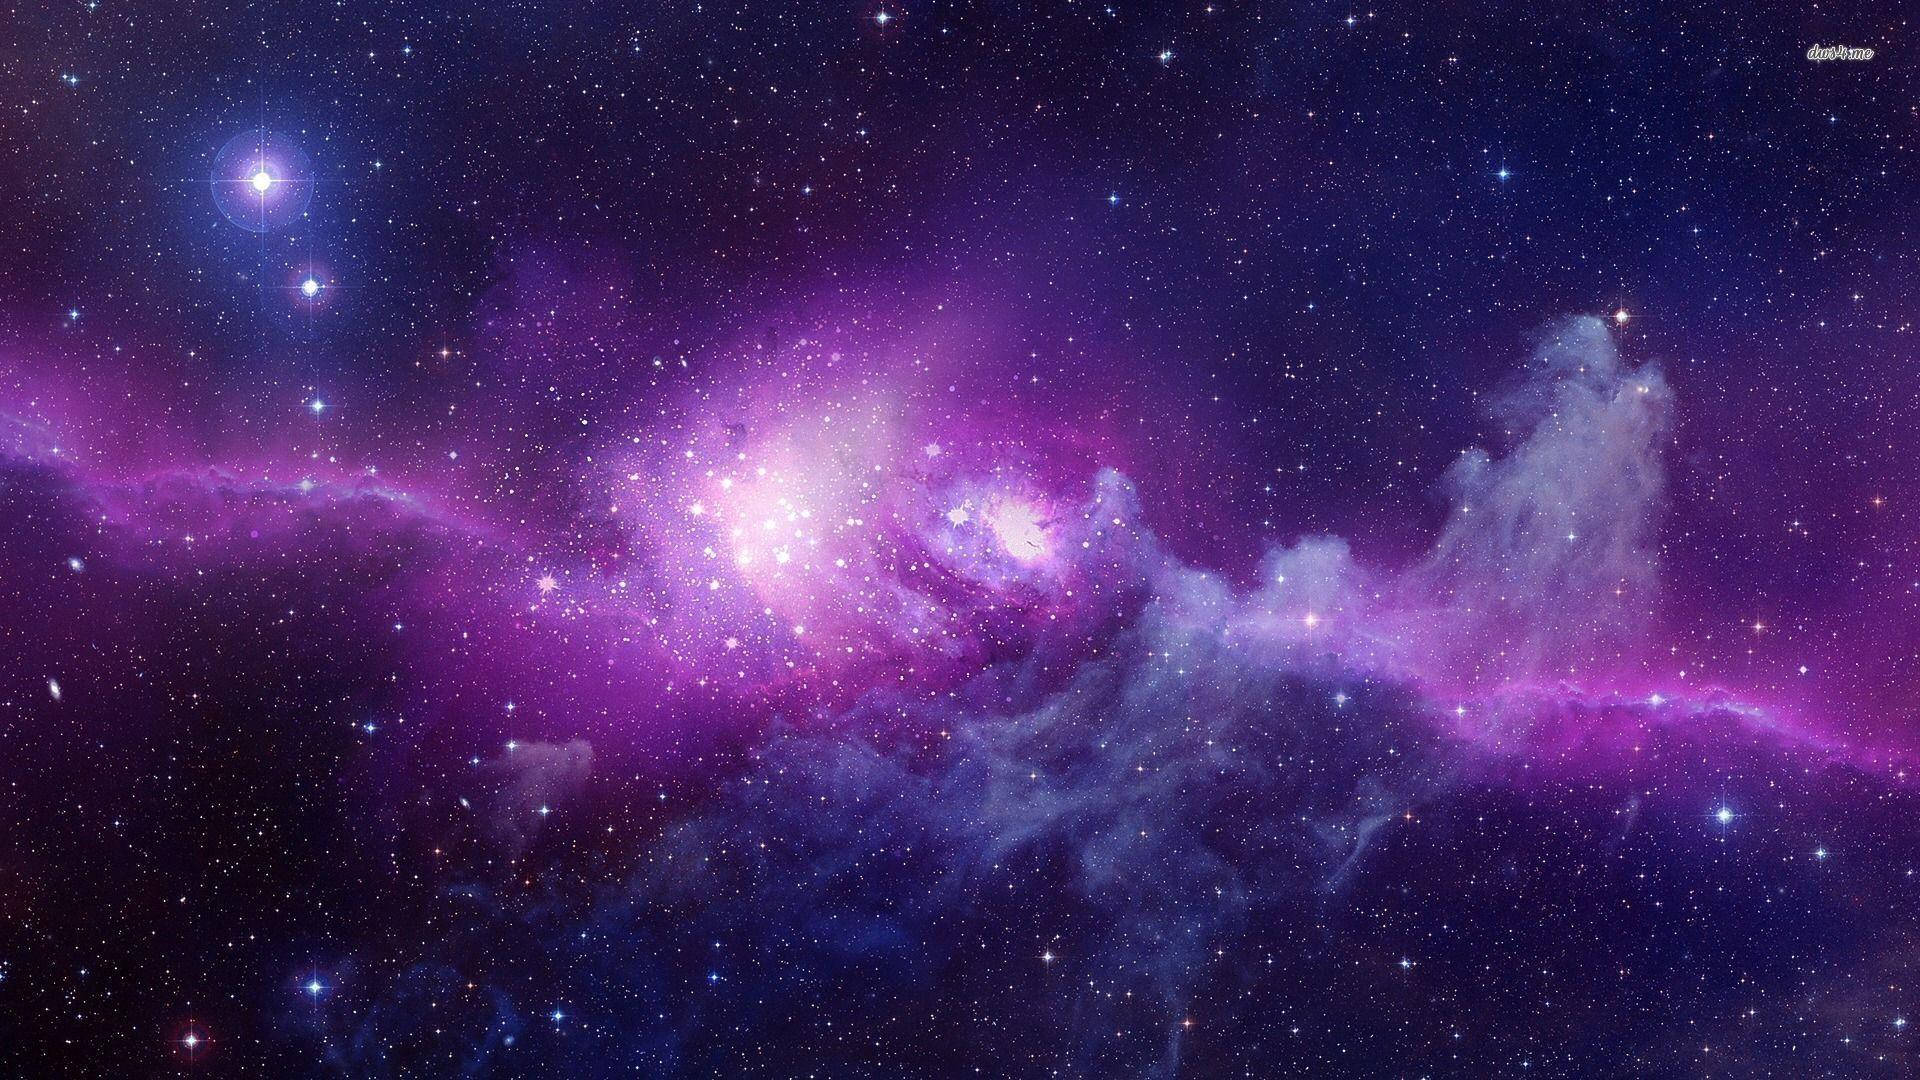 1920X1080 Purple Wallpaper and Background